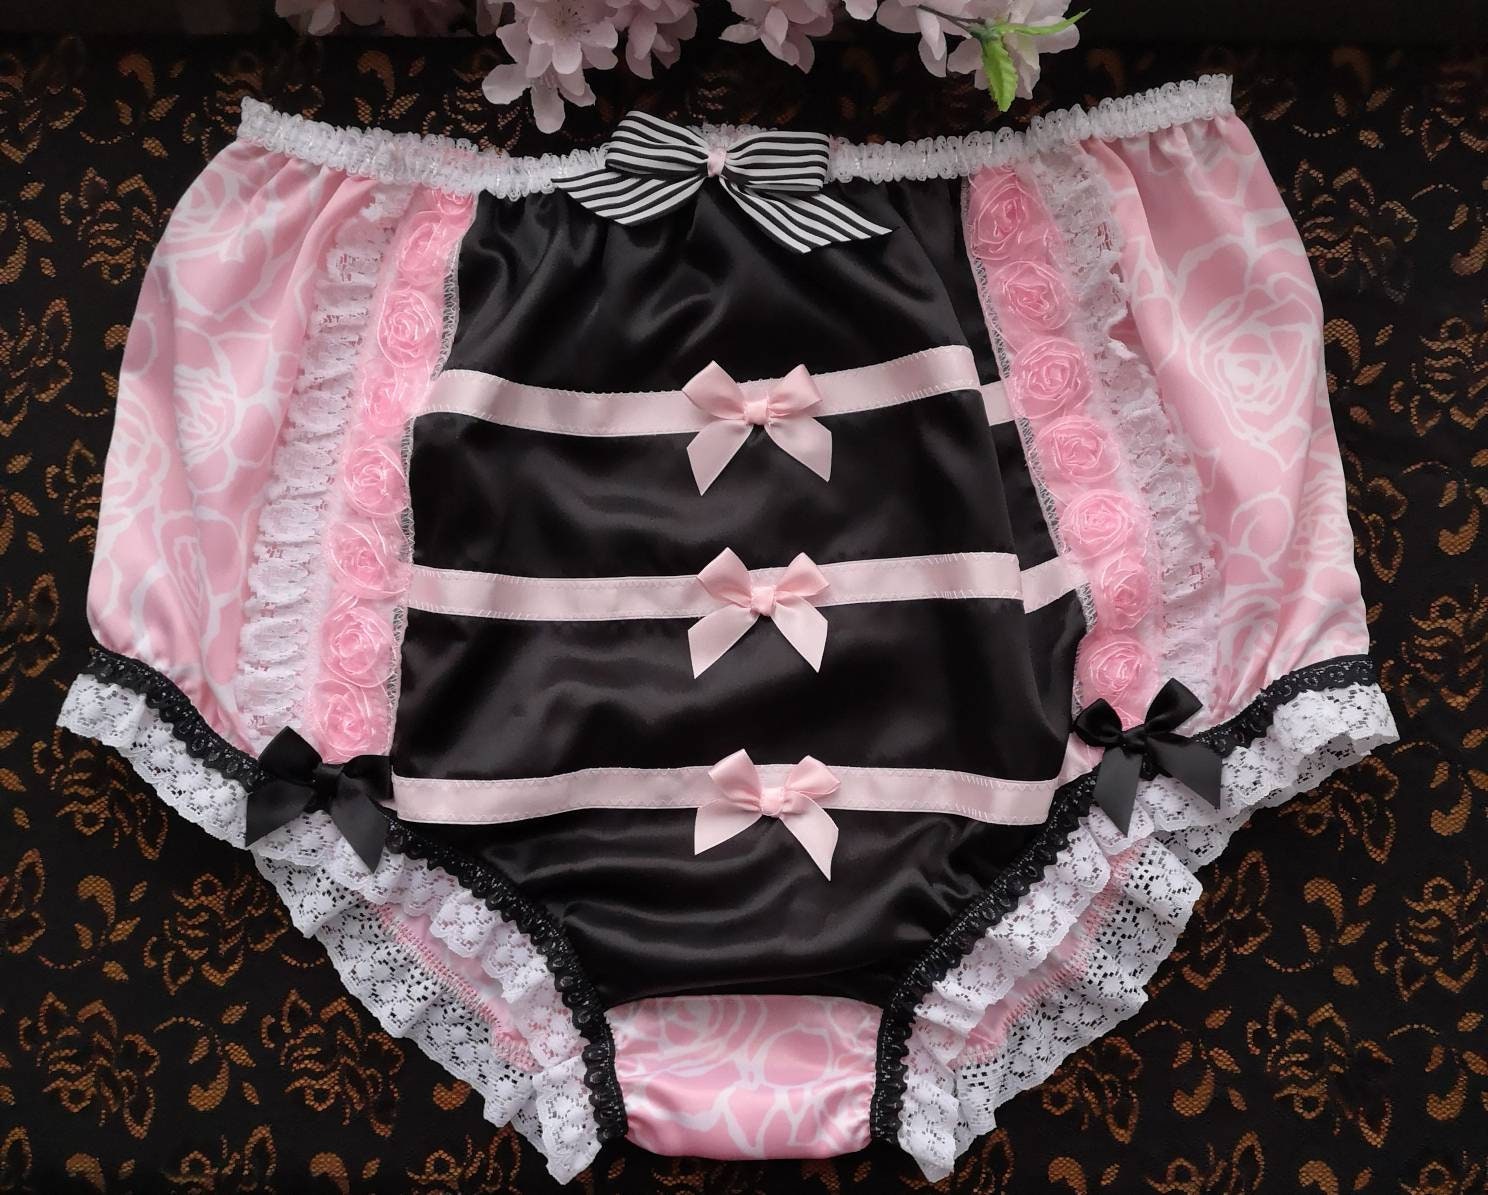 Rose Pink Printed Full Fit Silky Satin Sissy Panties contrast Front Panel.  Made to Order. Medium up to Extra Extra Large. 